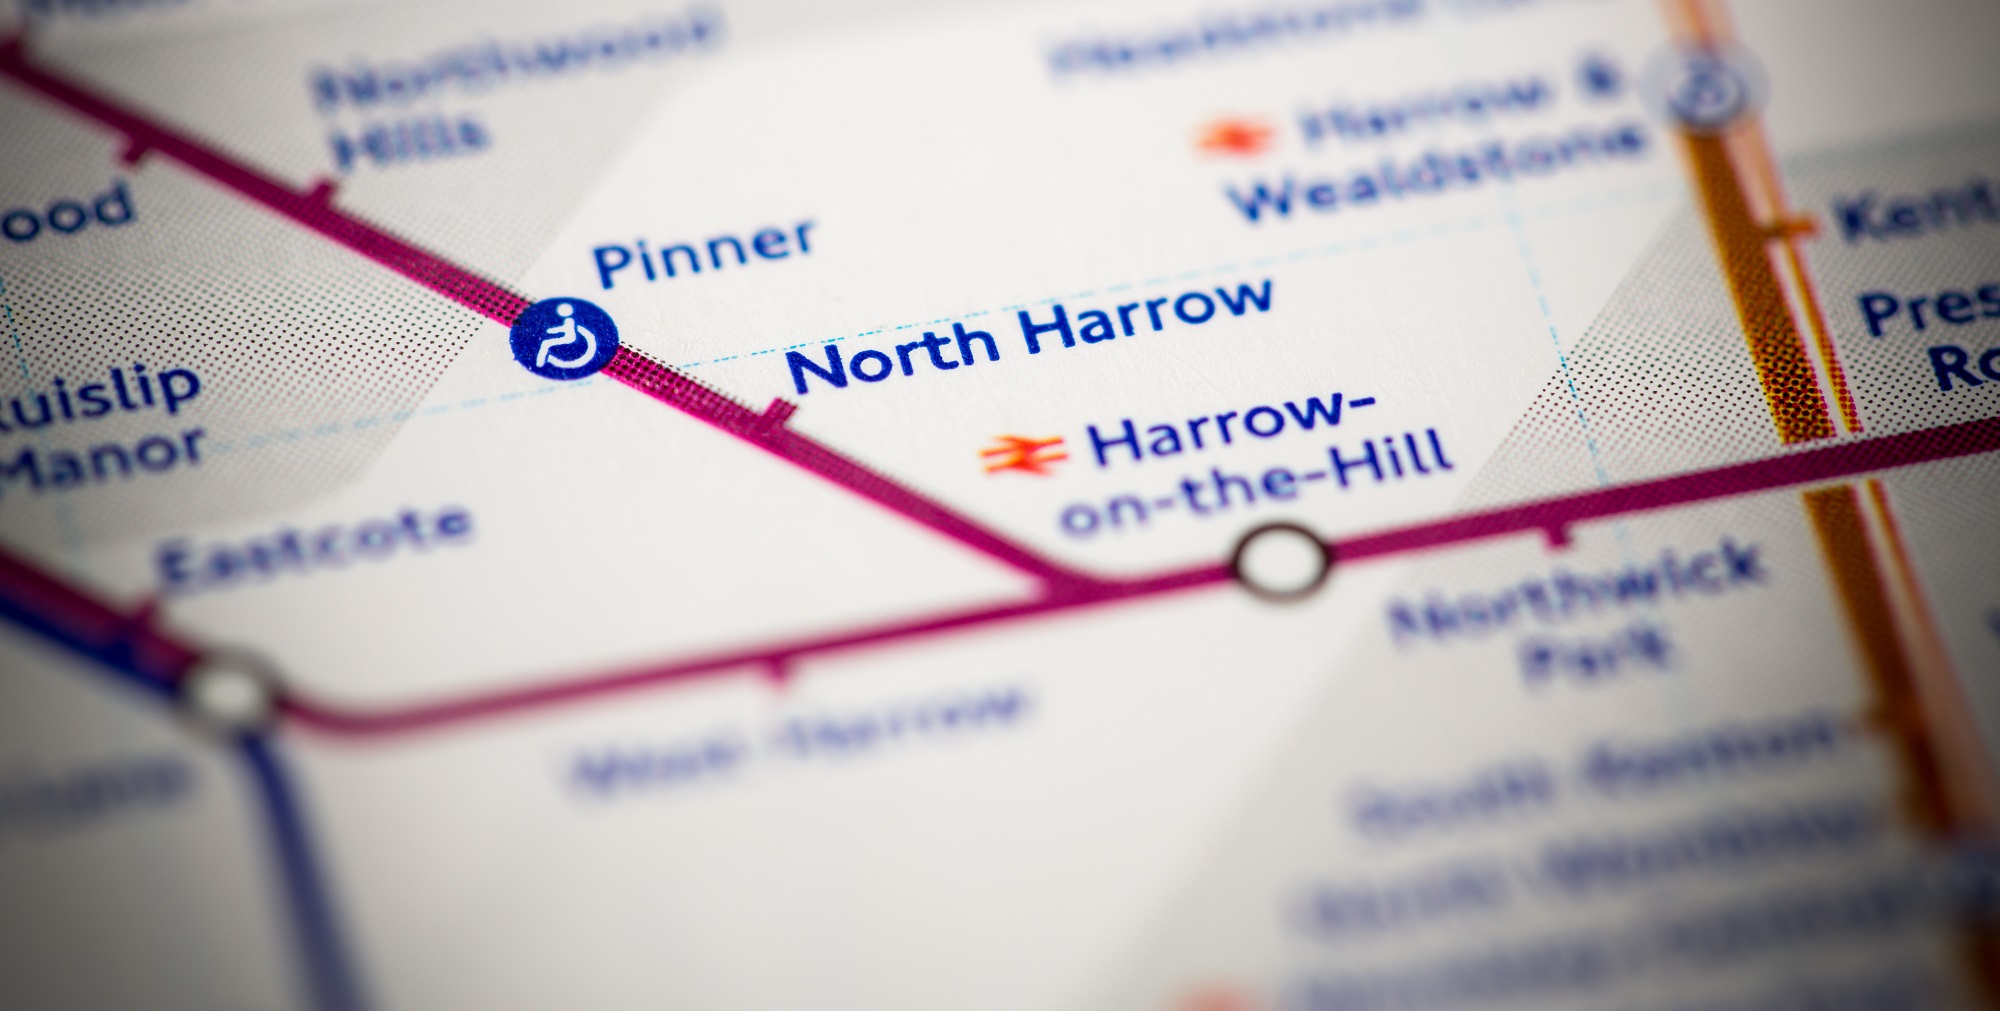 Everything you need to know about living in Harrow